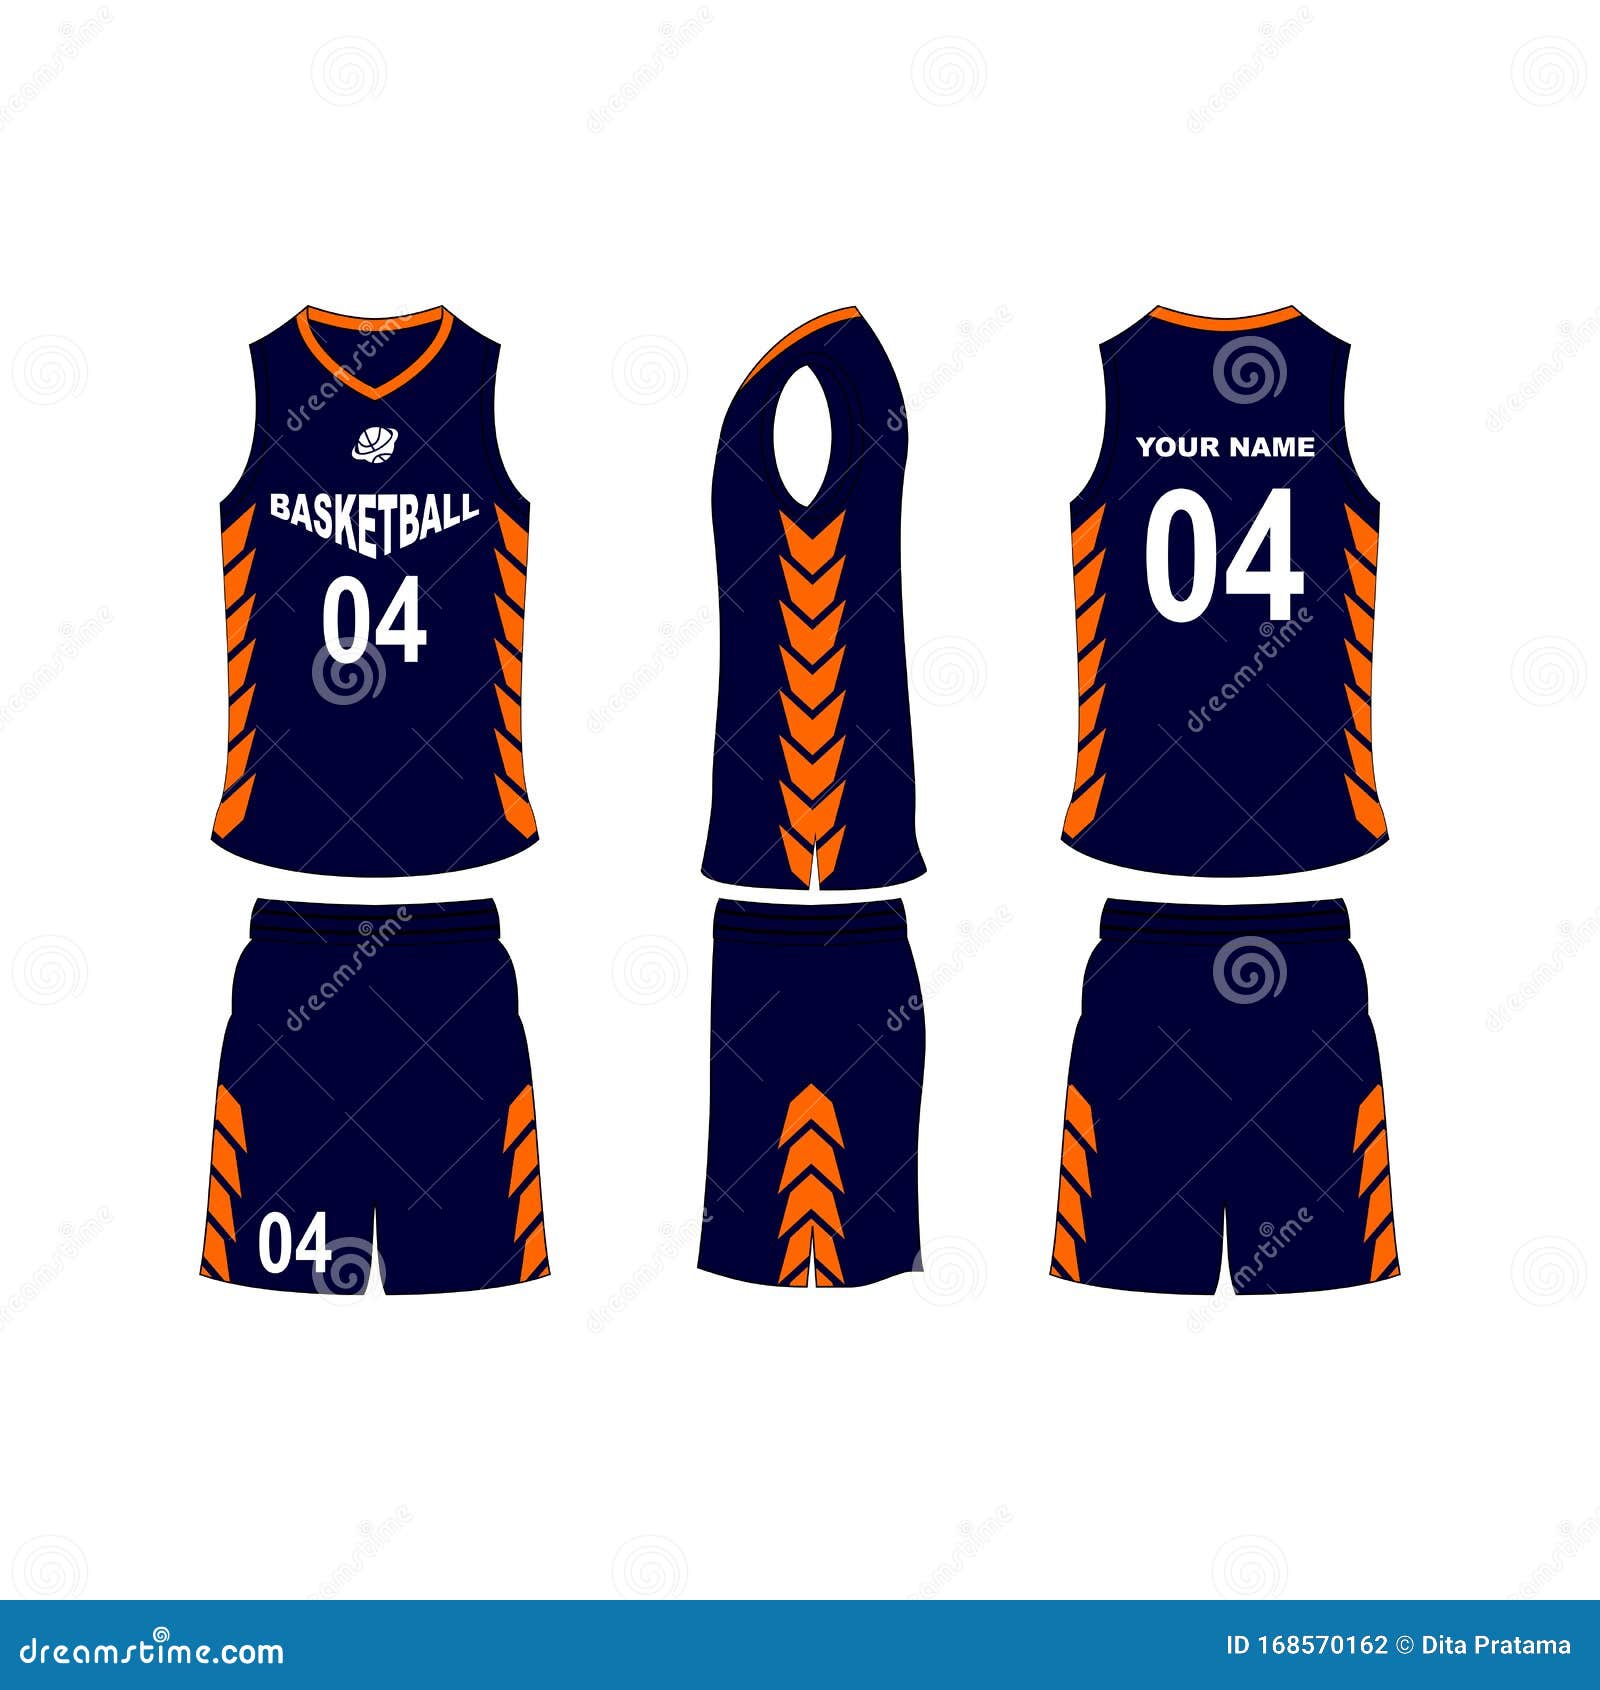 Basketball jersey of american Royalty Free Vector Image